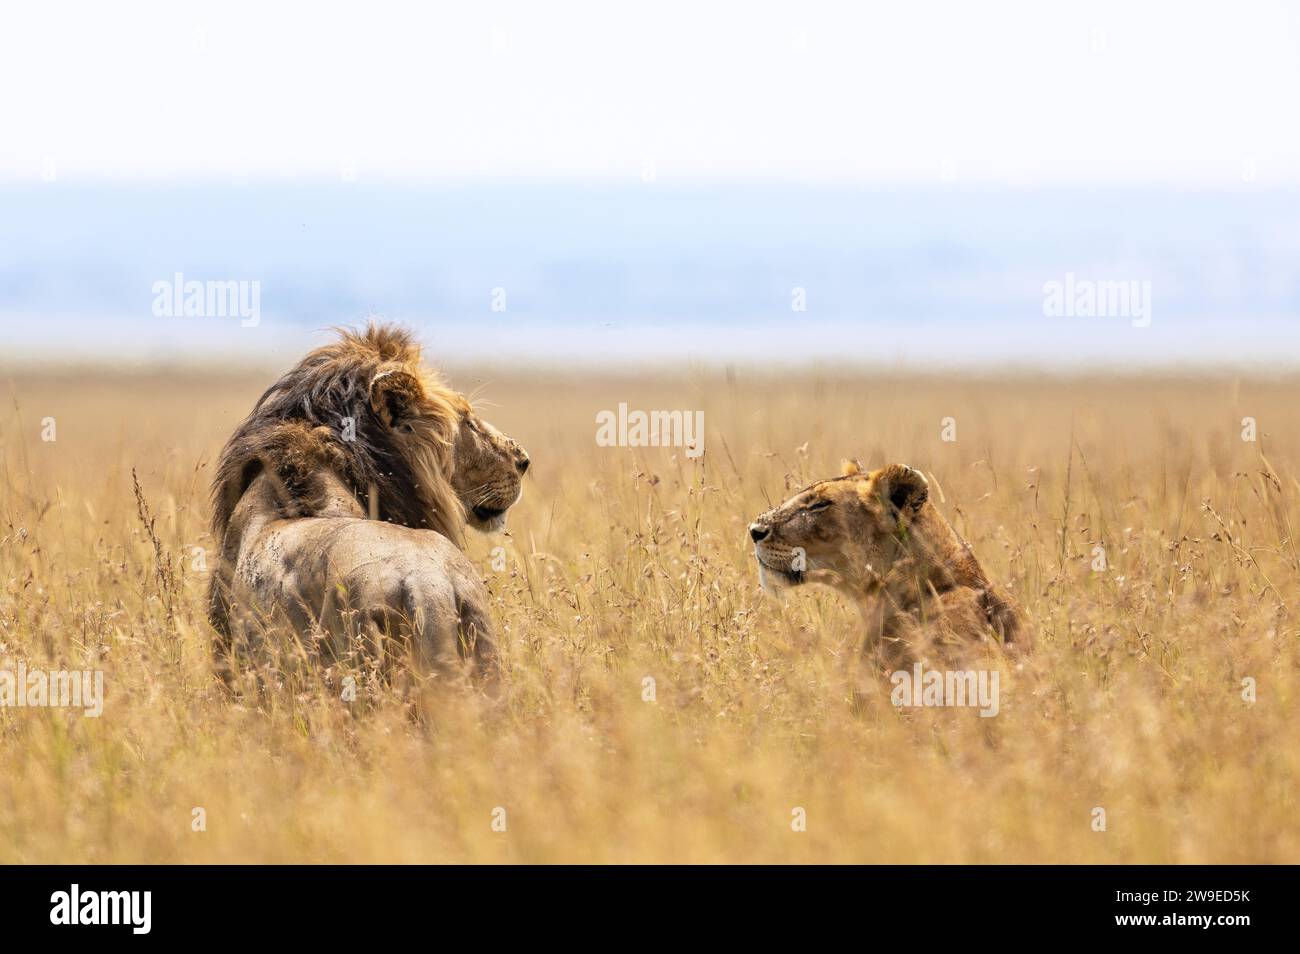 Lion and lioness looking at each others eyes while standing next to each other in high gras of savannah Stock Photo